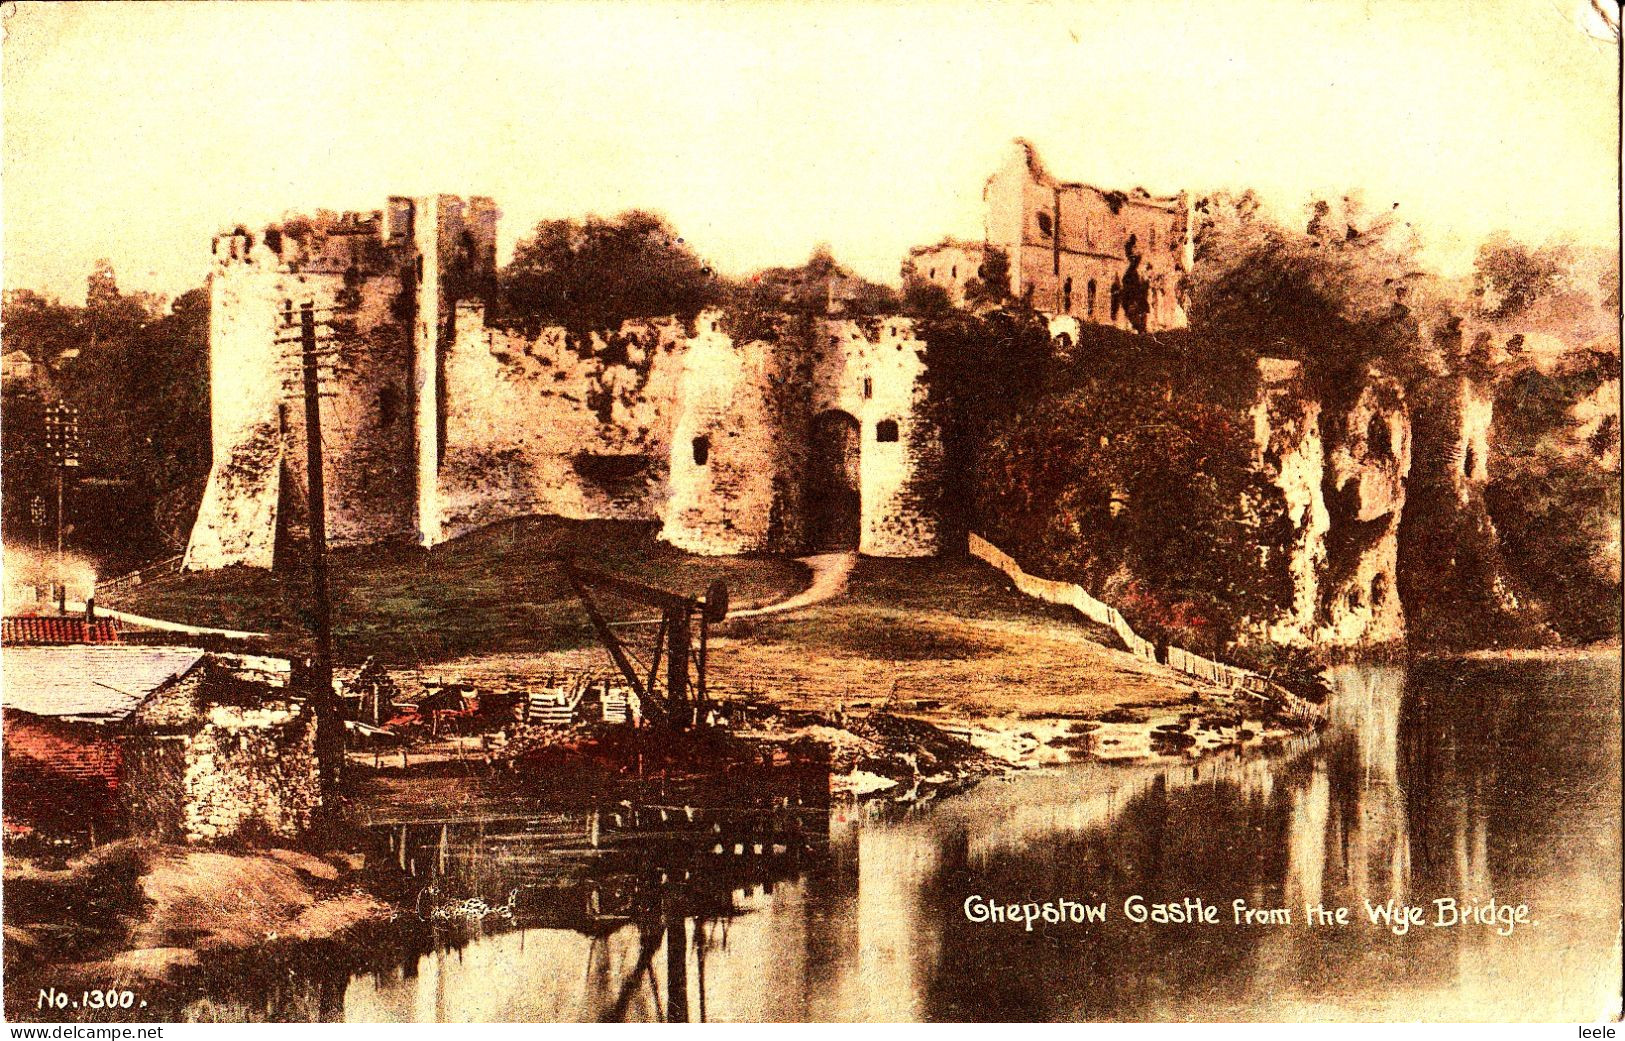 CG03. Vintage Postcard. Chepstow Castle From The Wye Bridge - Monmouthshire